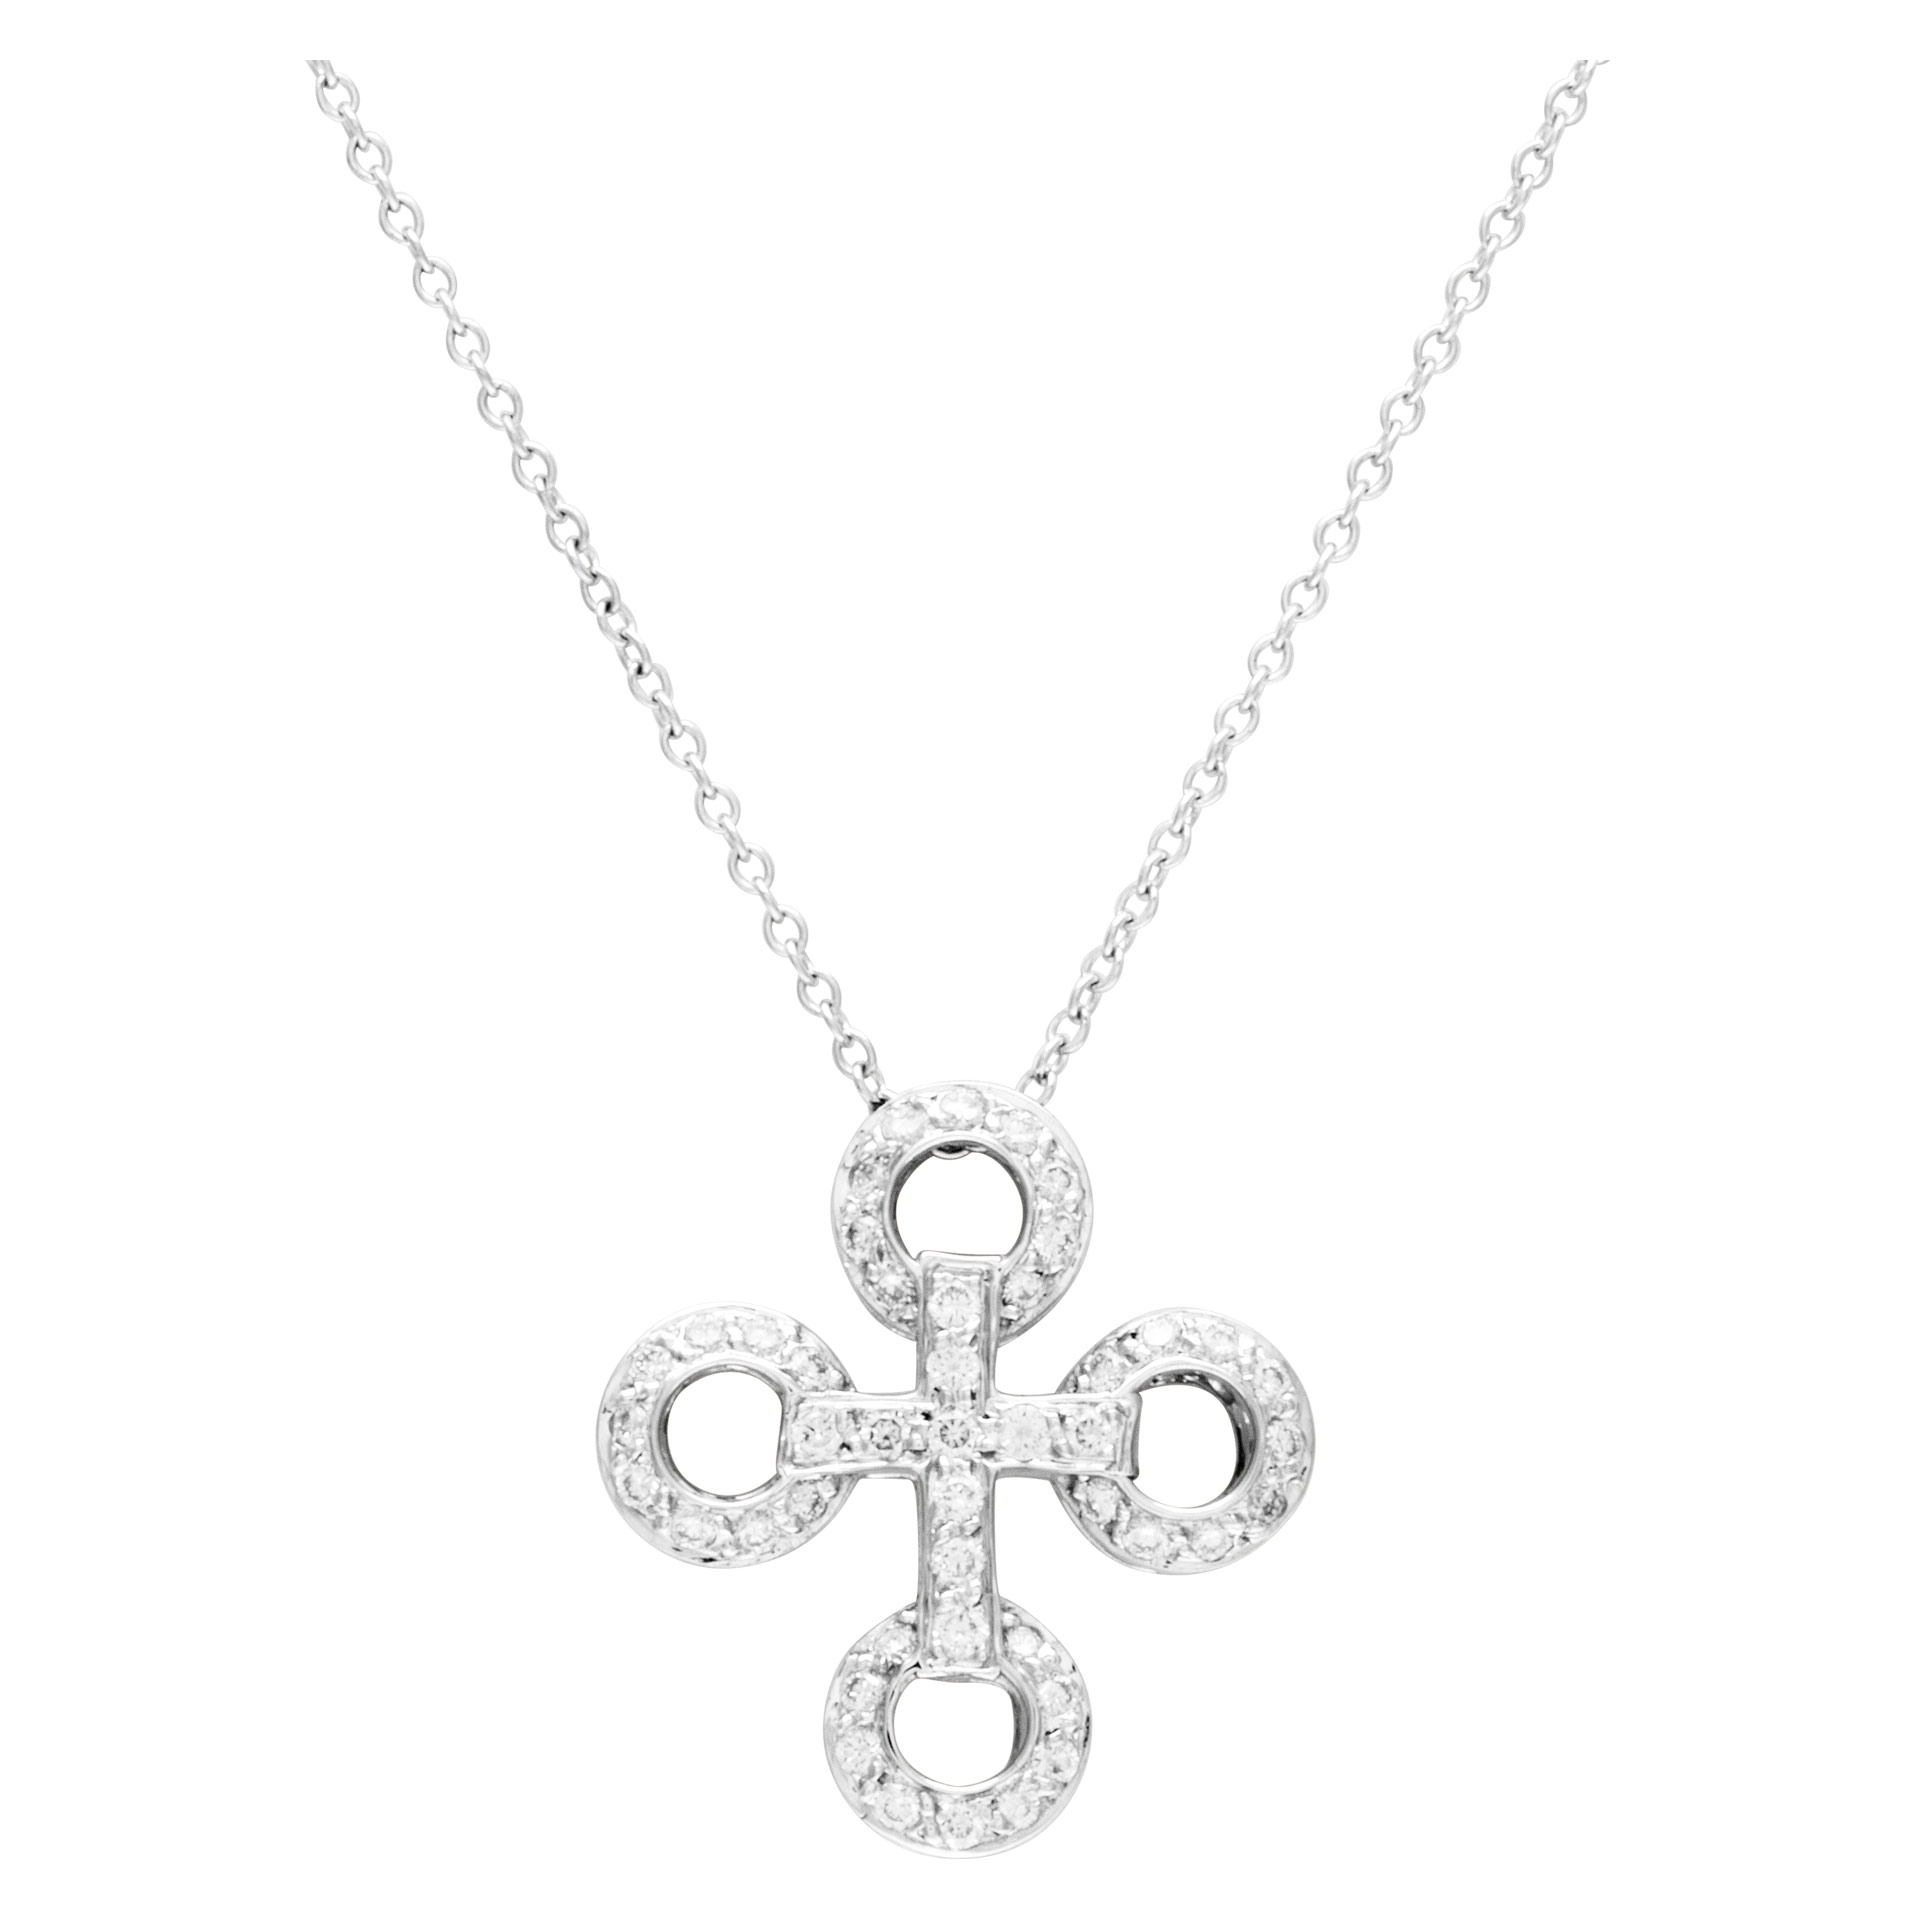 Pave Diamond cross necklace in 18k white gold. 0.50 carats in diamonds image 1